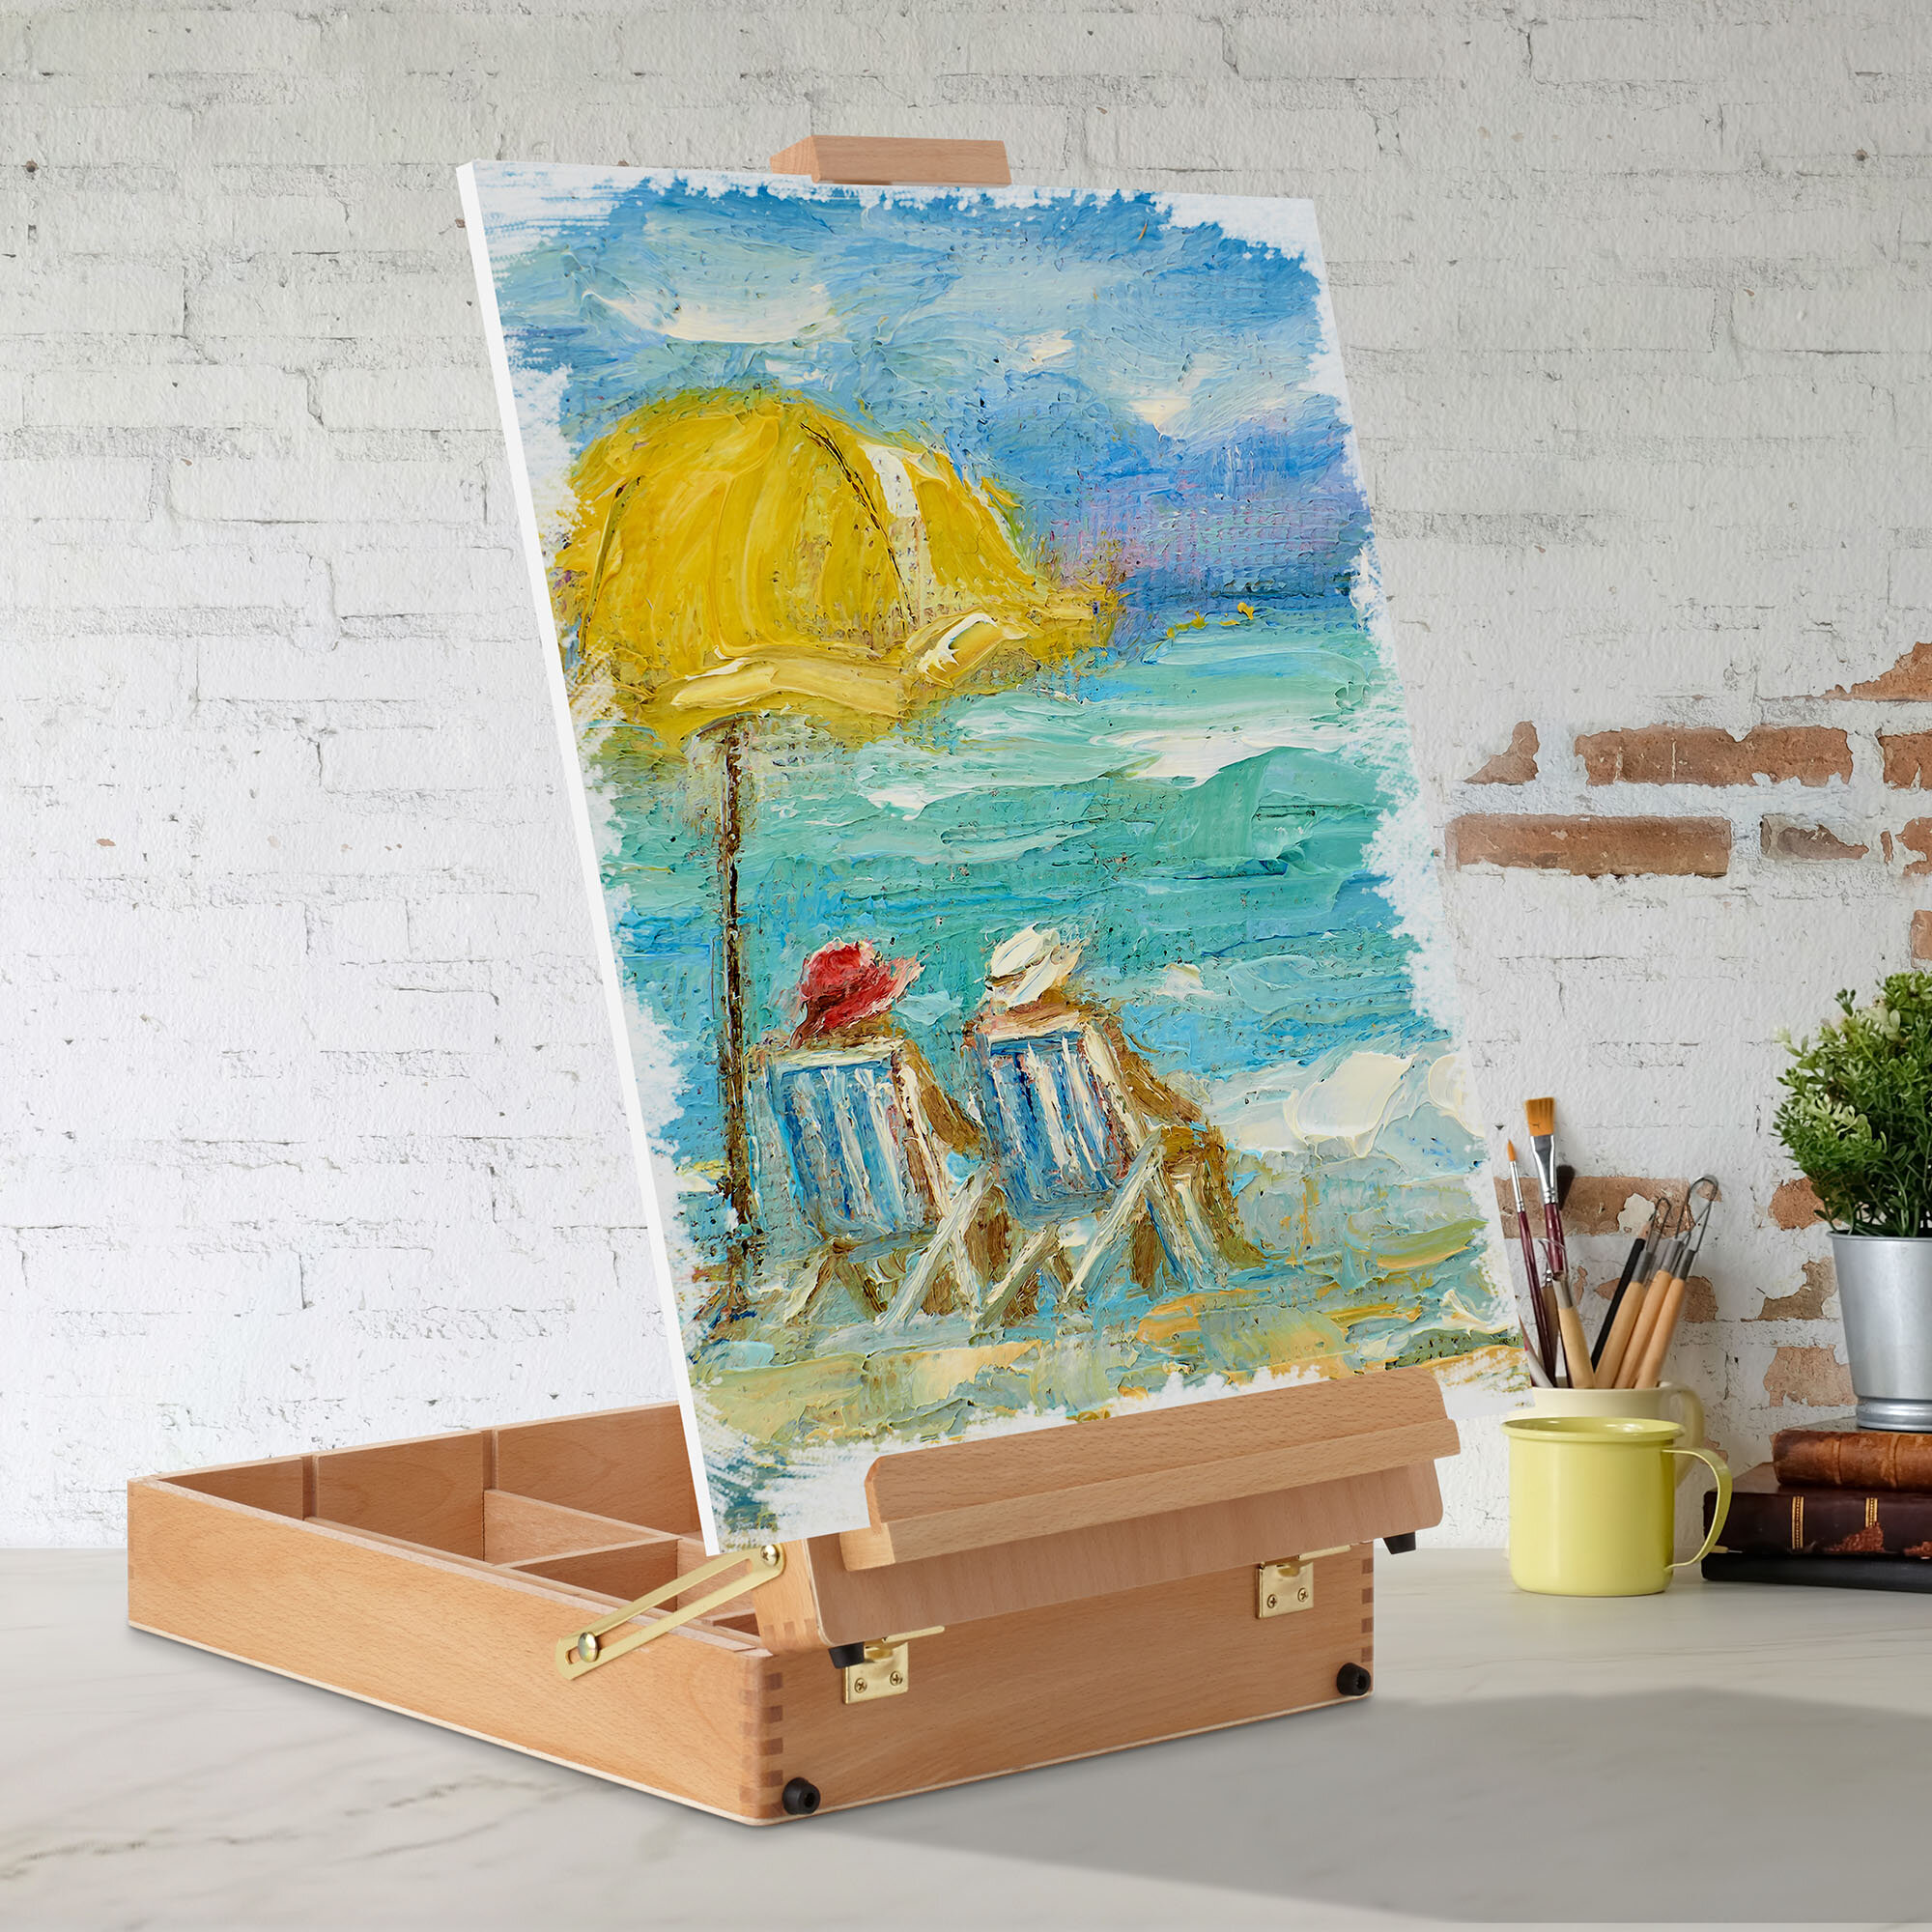 Artistik Wood Desk Table Easel - Handcrafted Beechwood Desktop Easel & Wooden Art Tabletop Box for Drawing, Painting, and Sketching | with 3 Front